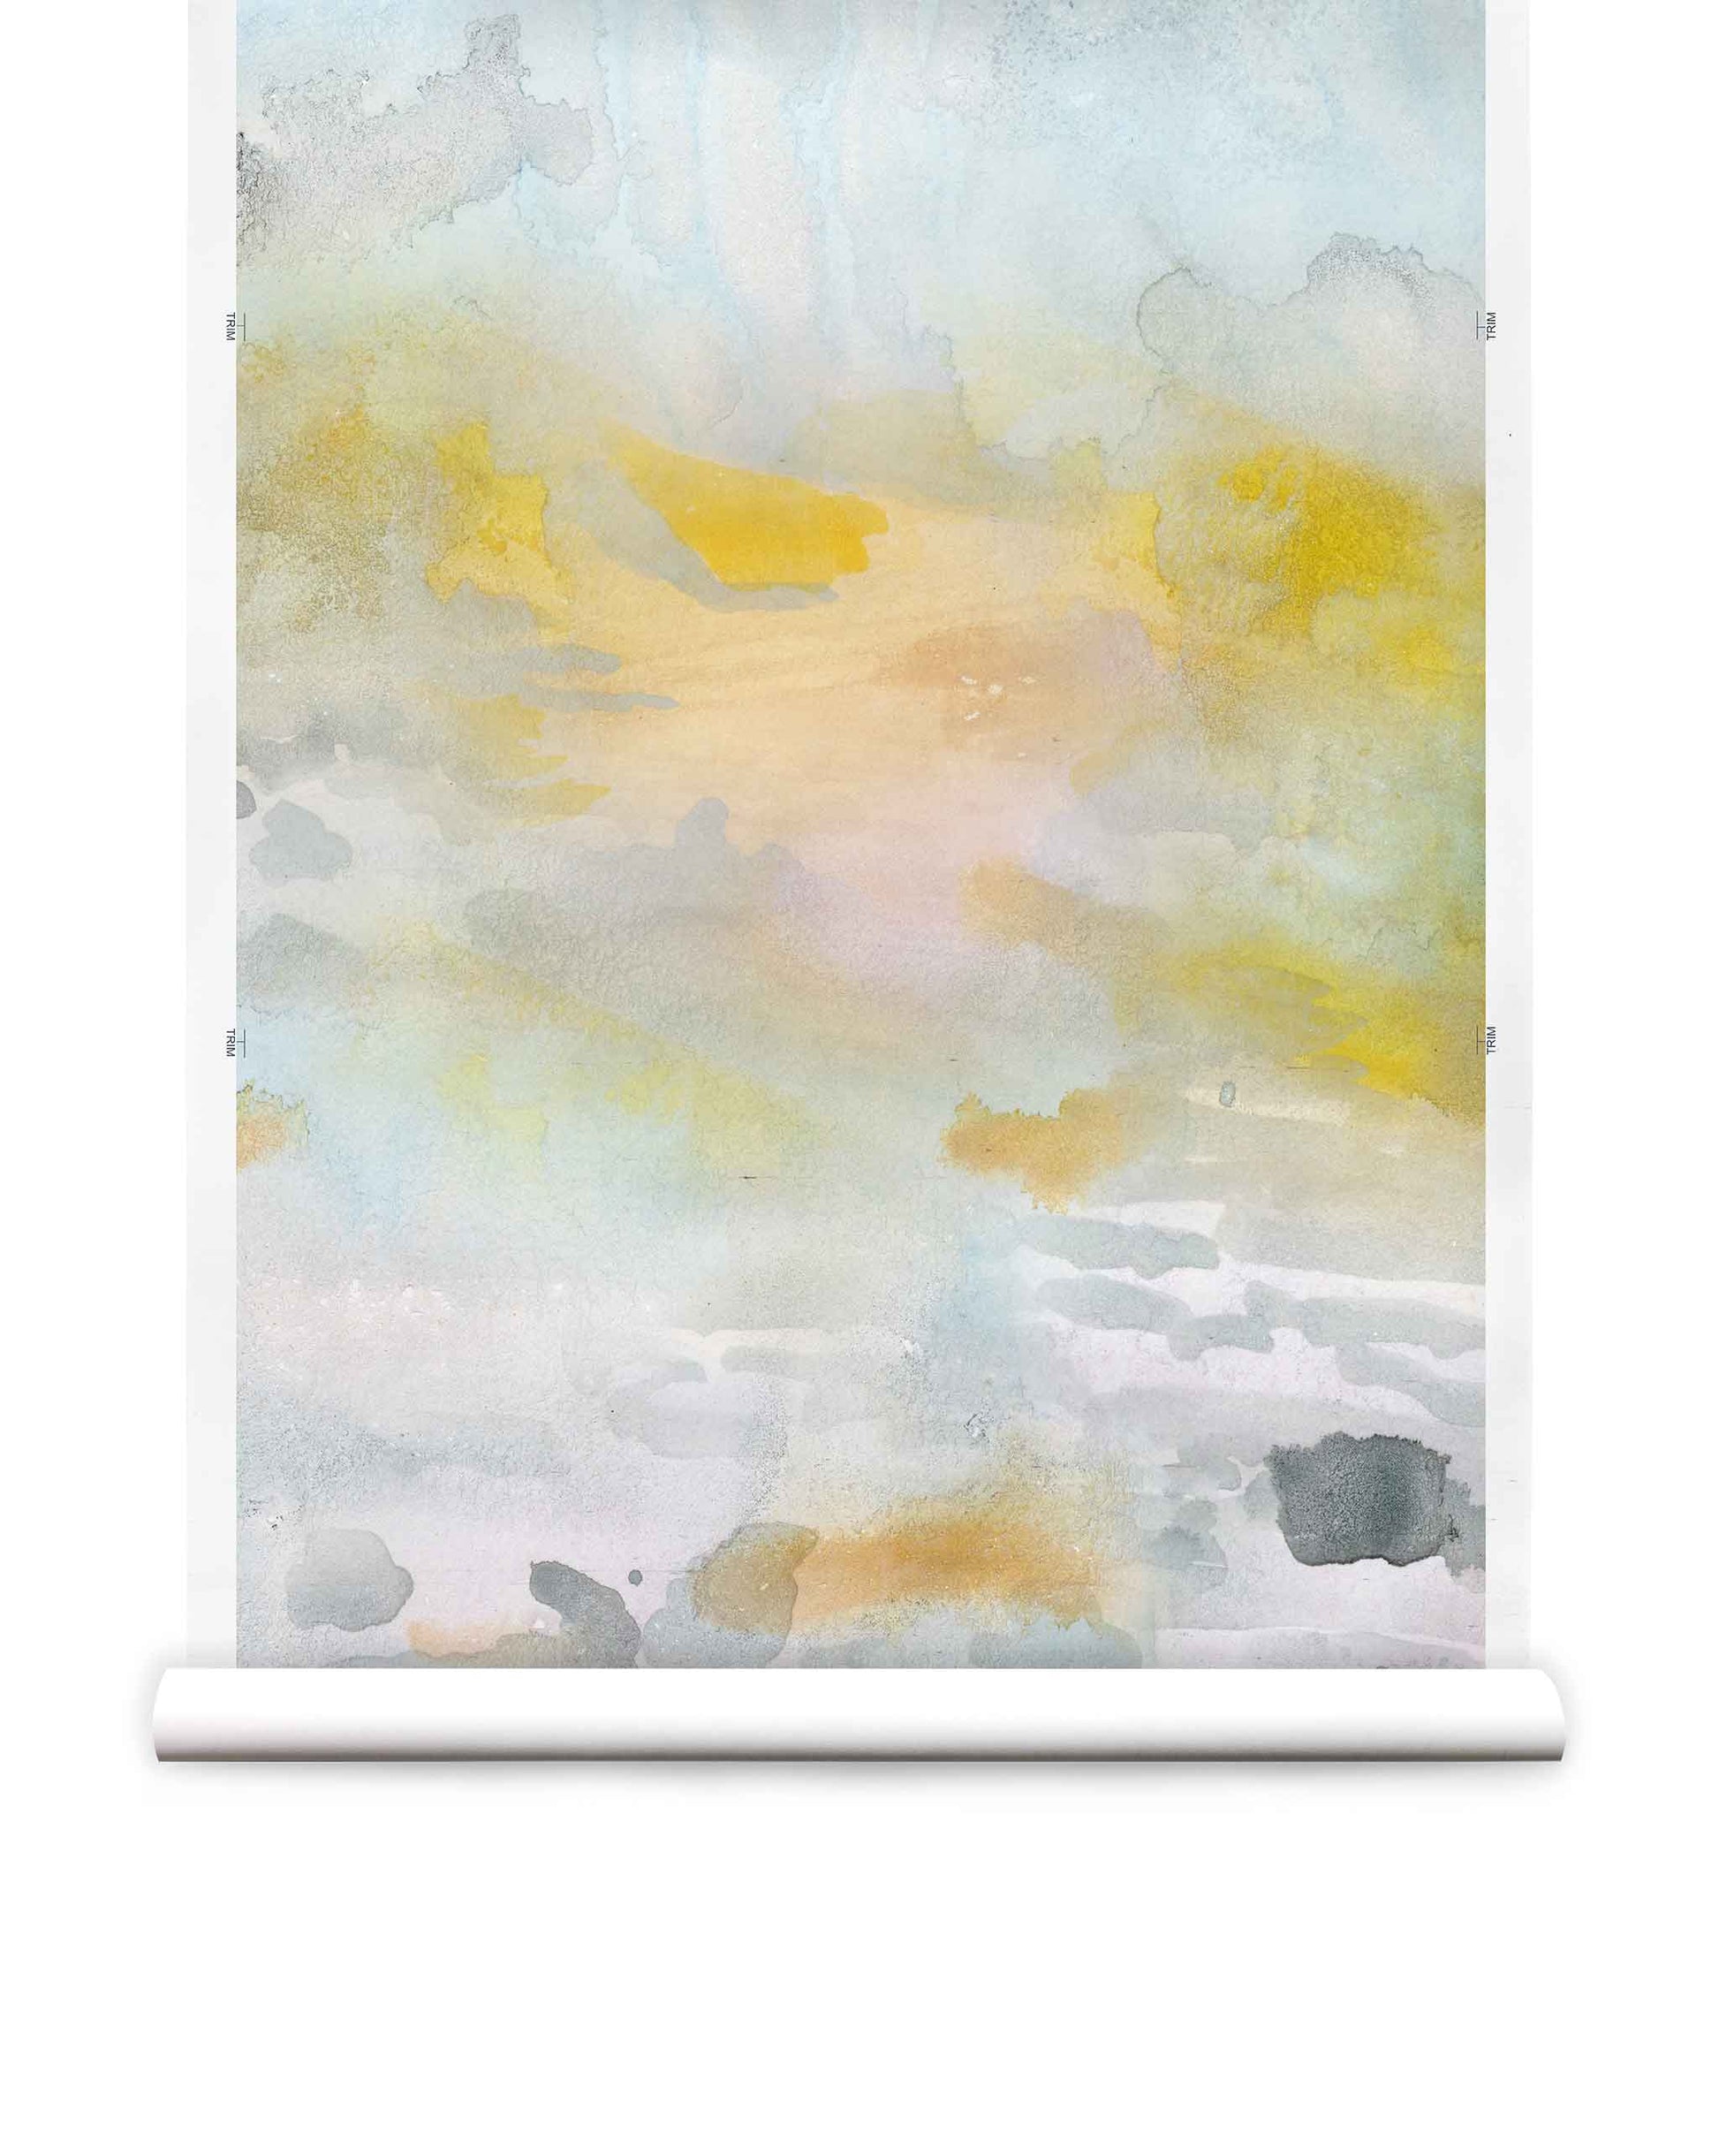 Empyrean silk wallpaper by Eskayel is a collage of skies and sunsets. In Dawn, the palette is multicolor.